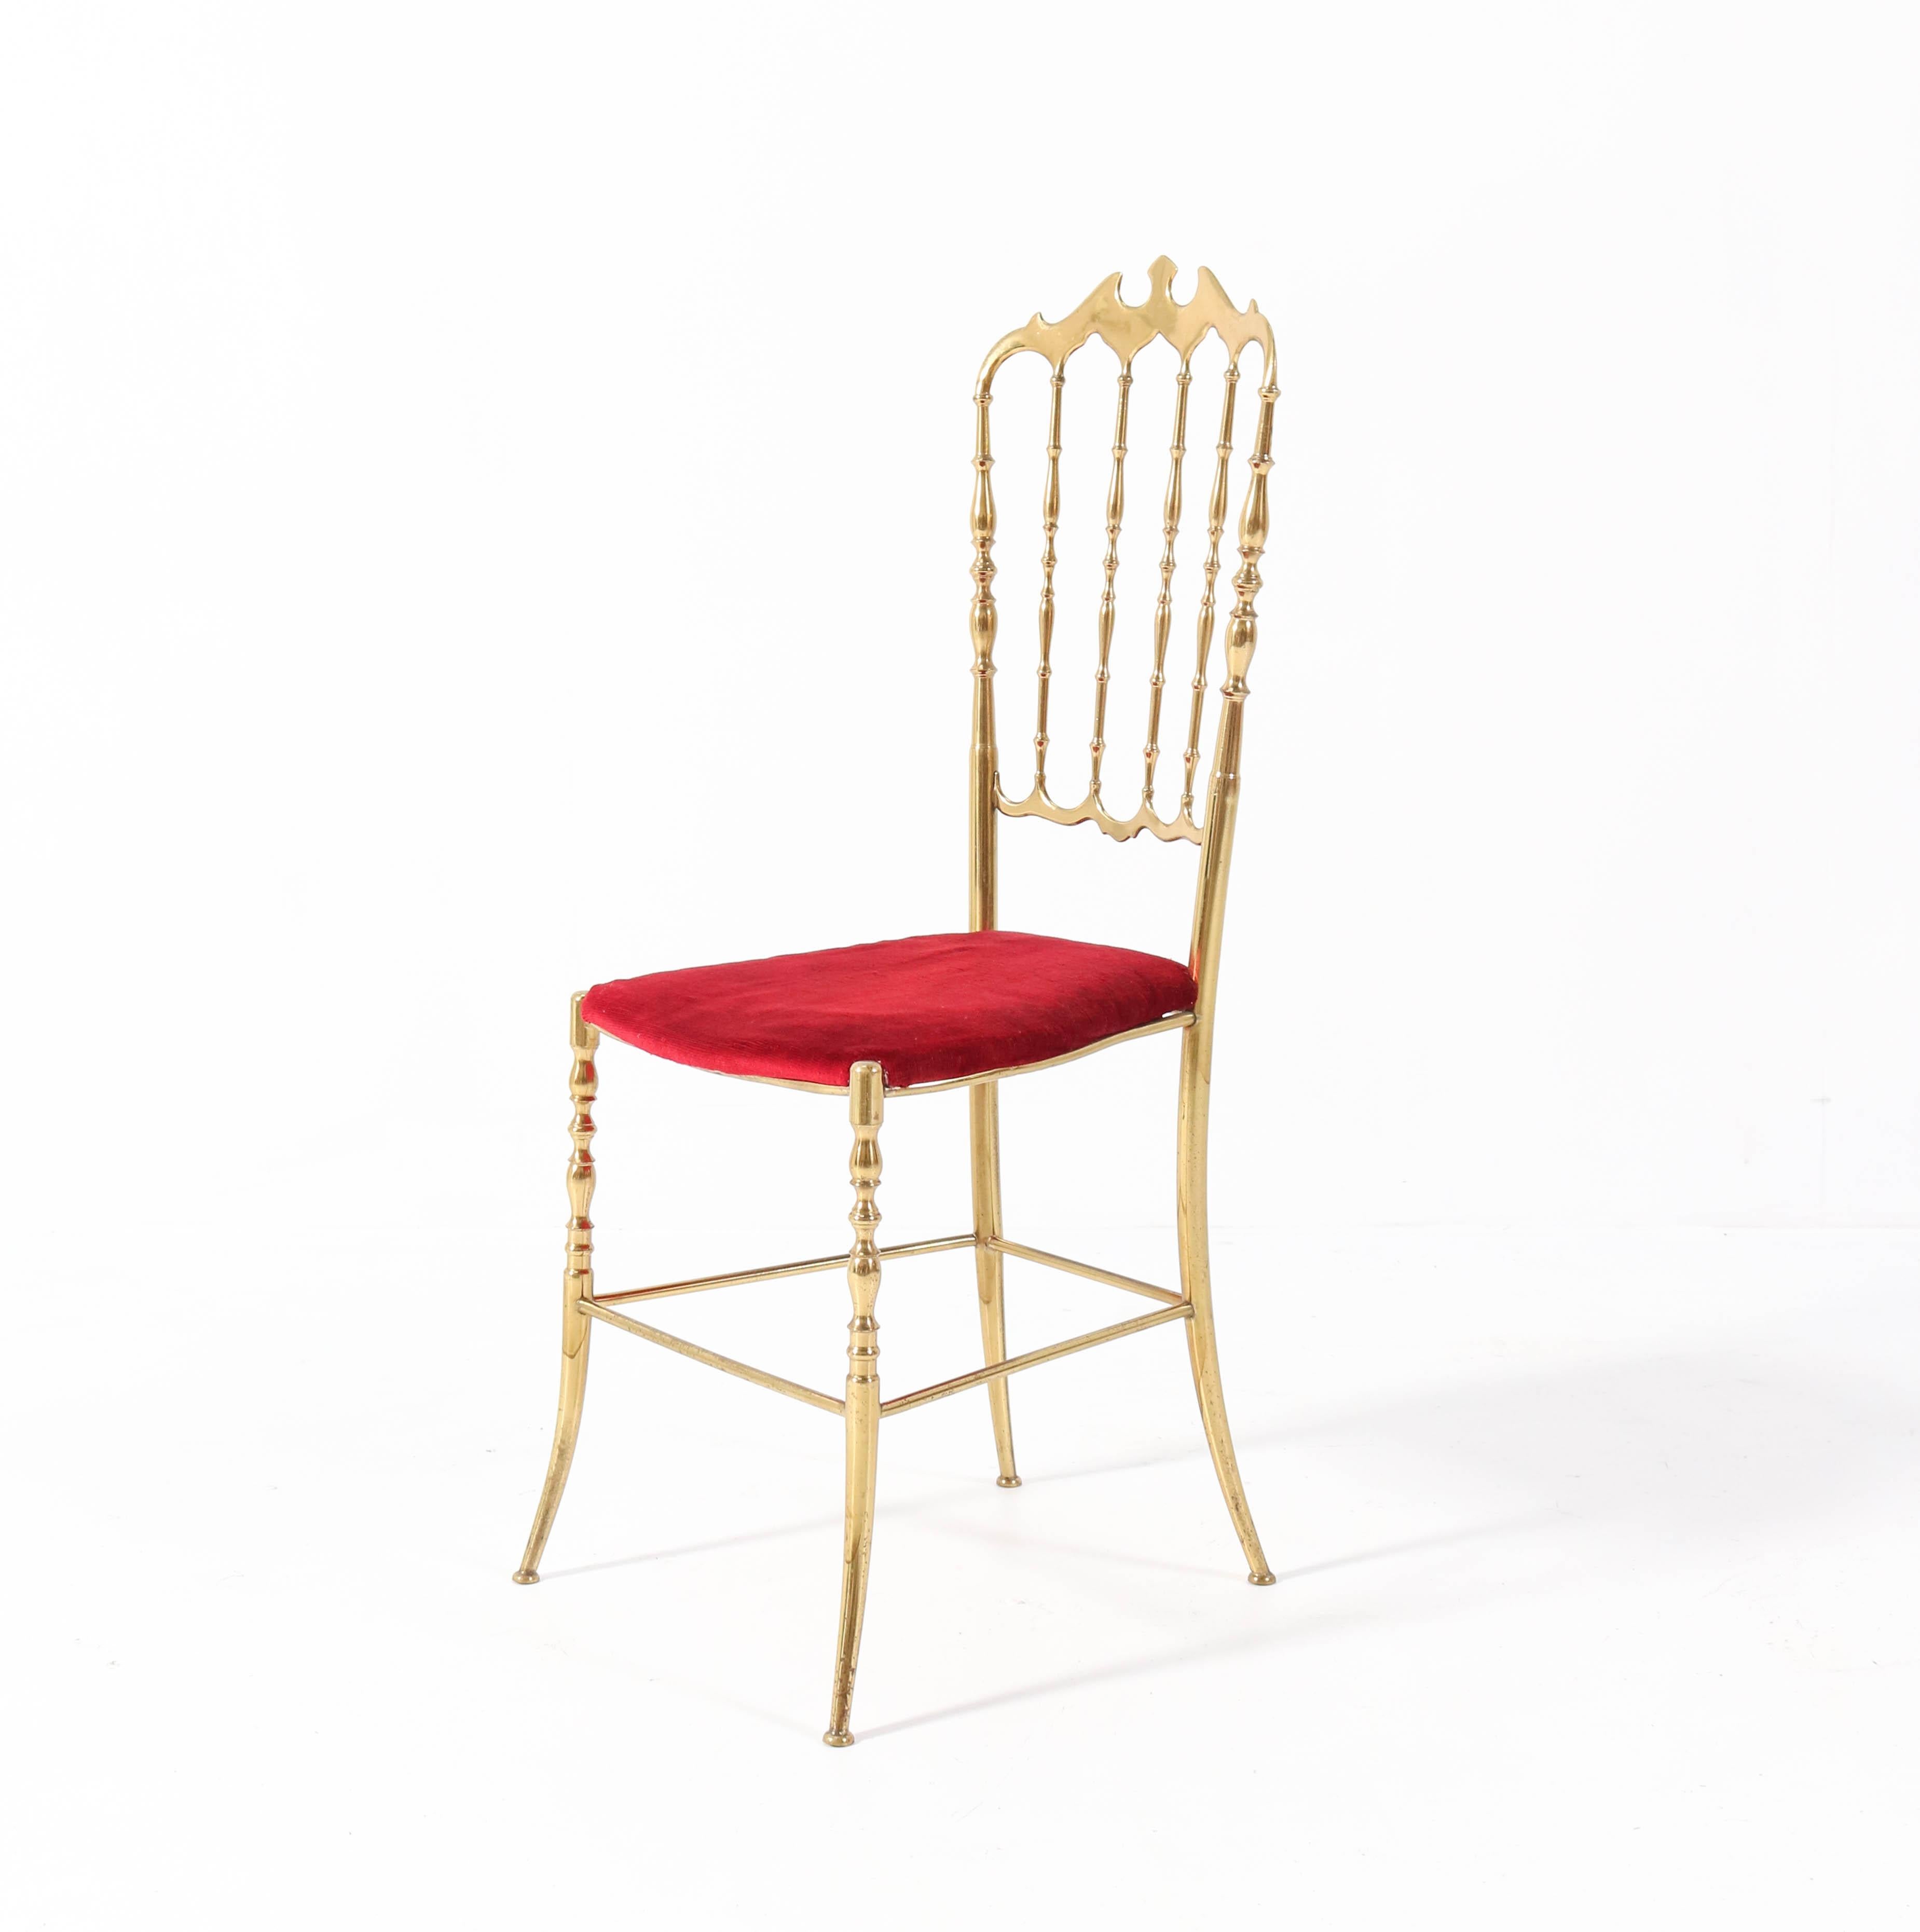 Stunning and elegant Mid-Century Modern chair.
Design by Chiavari.
Striking Italian design from the 1960s.
Solid brass frame with original red velvet seat.
In very good condition with minor wear consistent with age and use,
preserving a